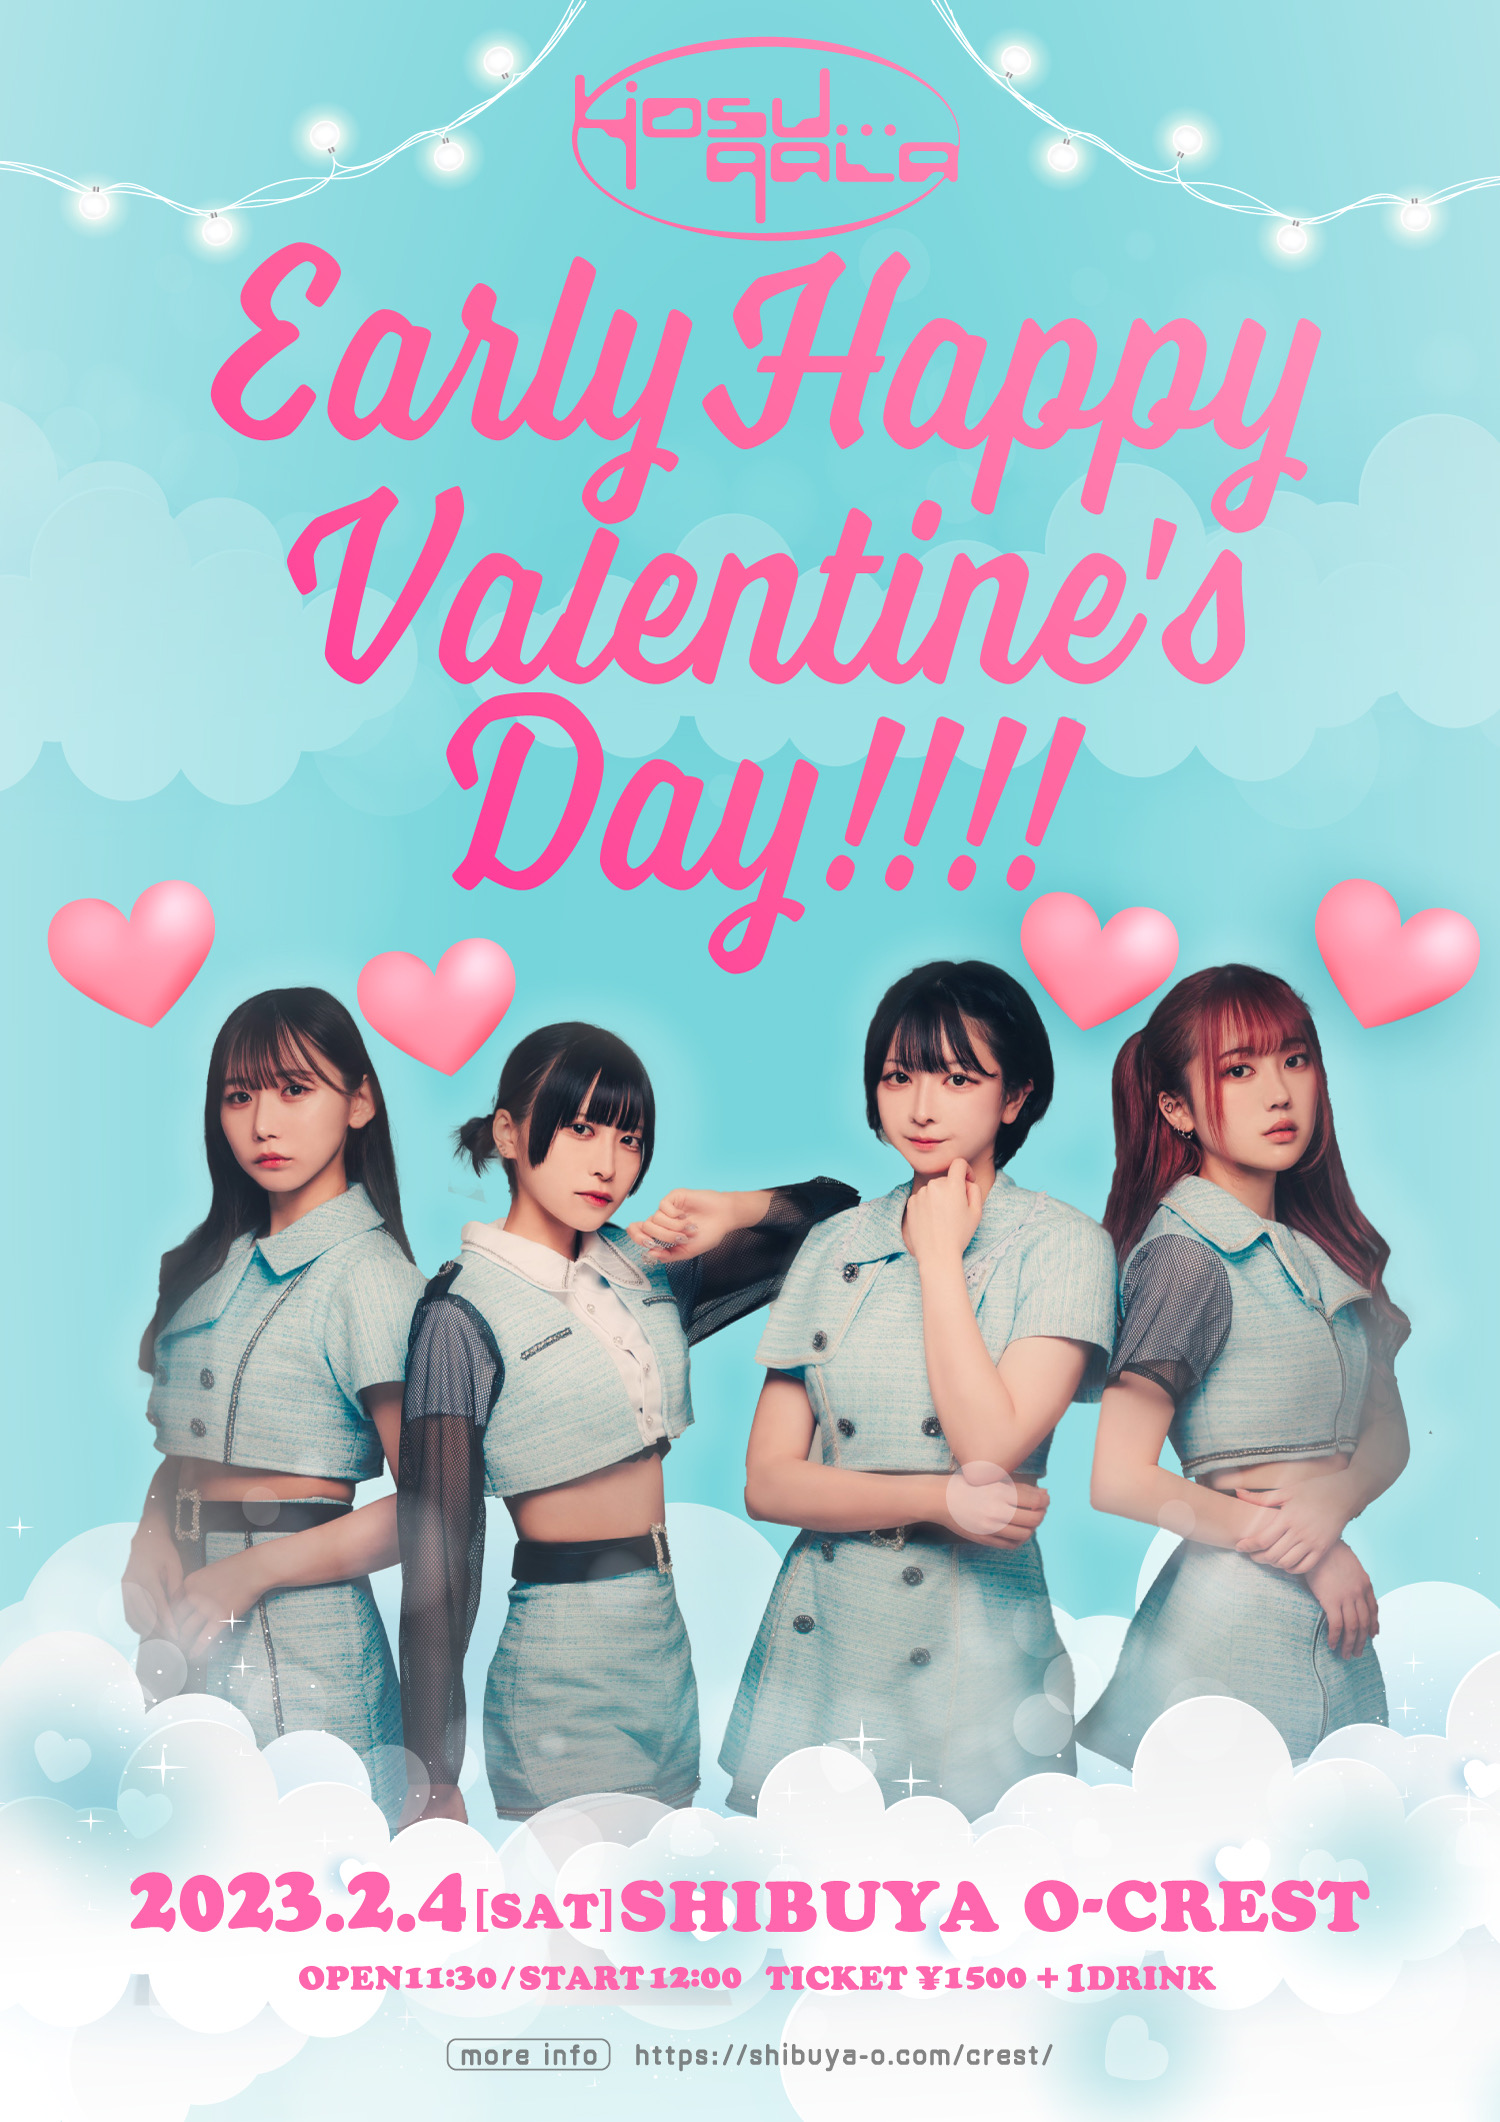 「Early Happy Valentine's Day!!!!」